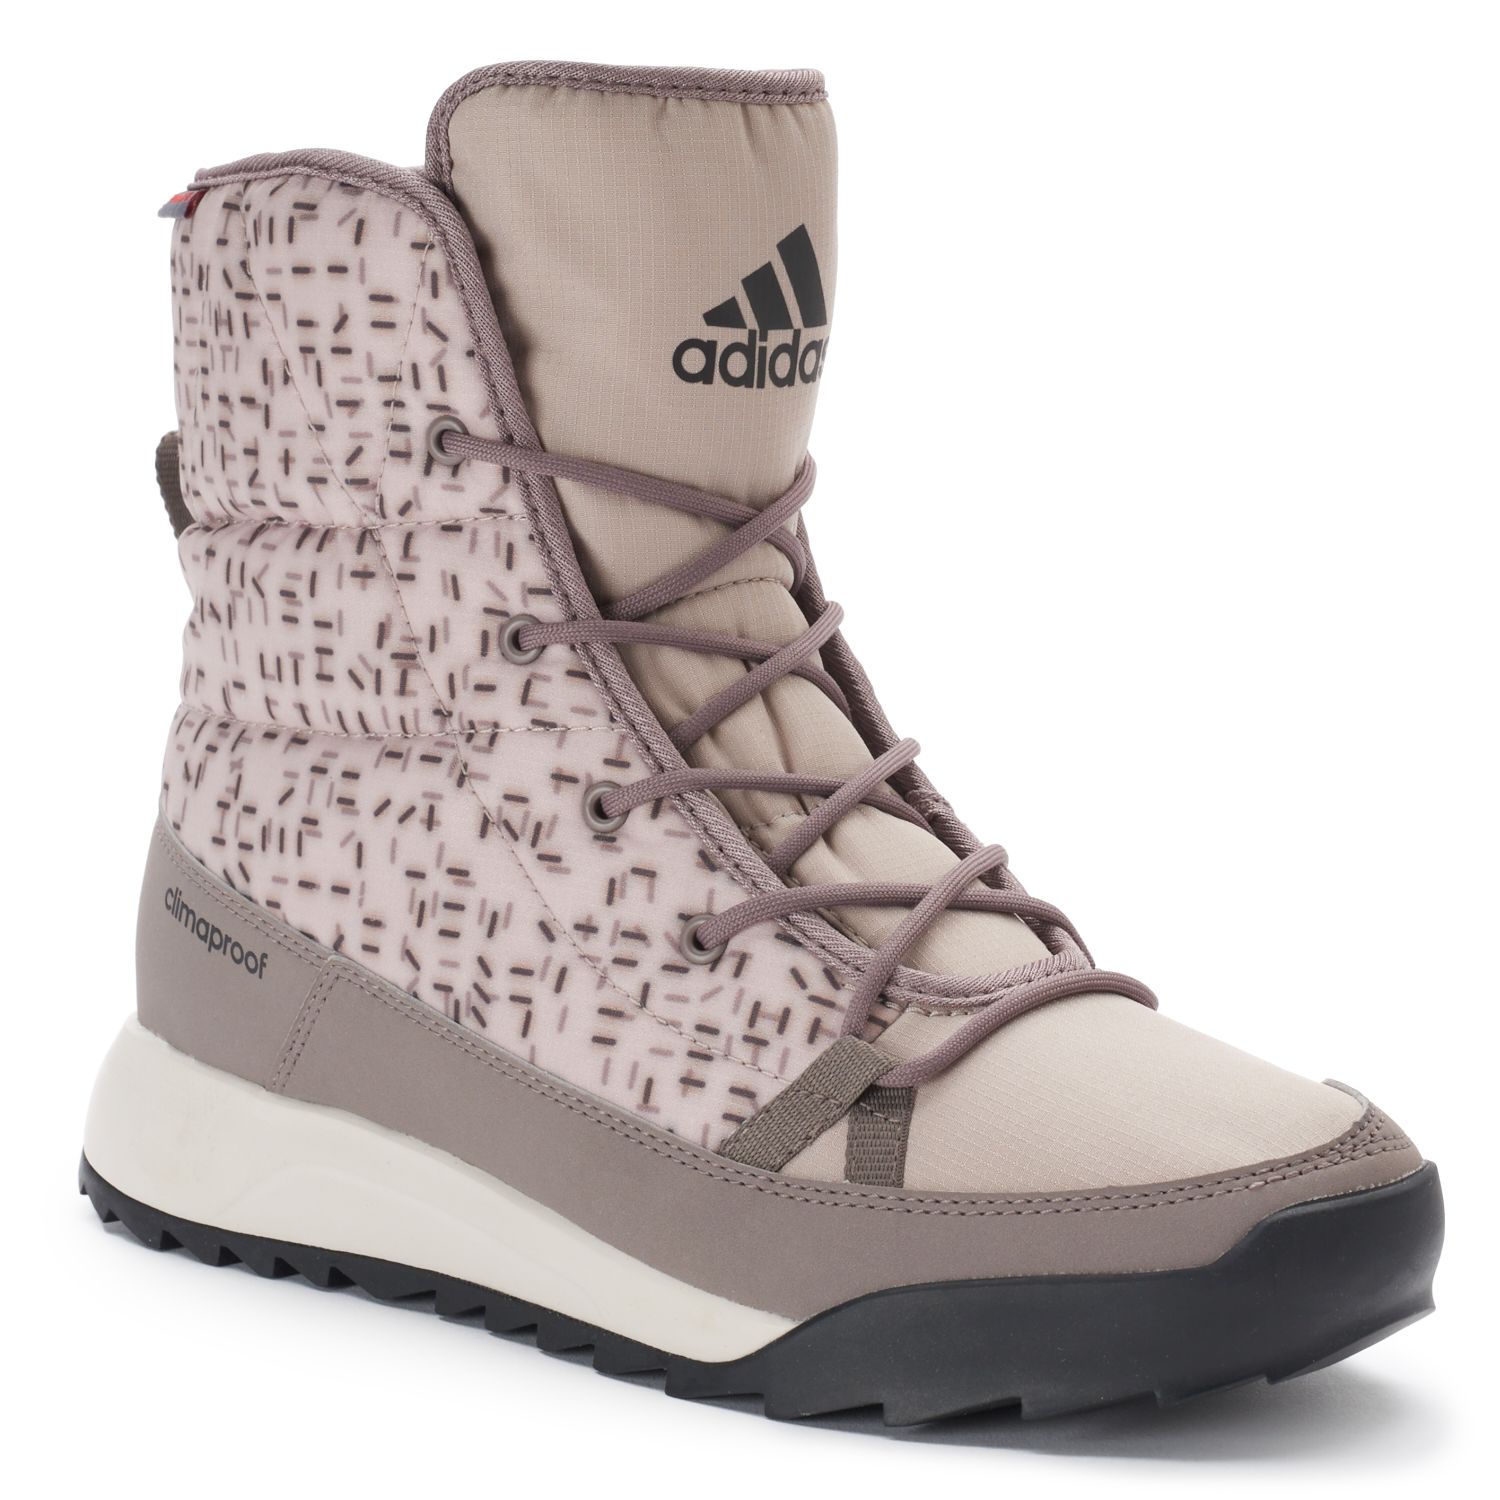 adidas outdoor women's cw choleah insulated cp snow boot